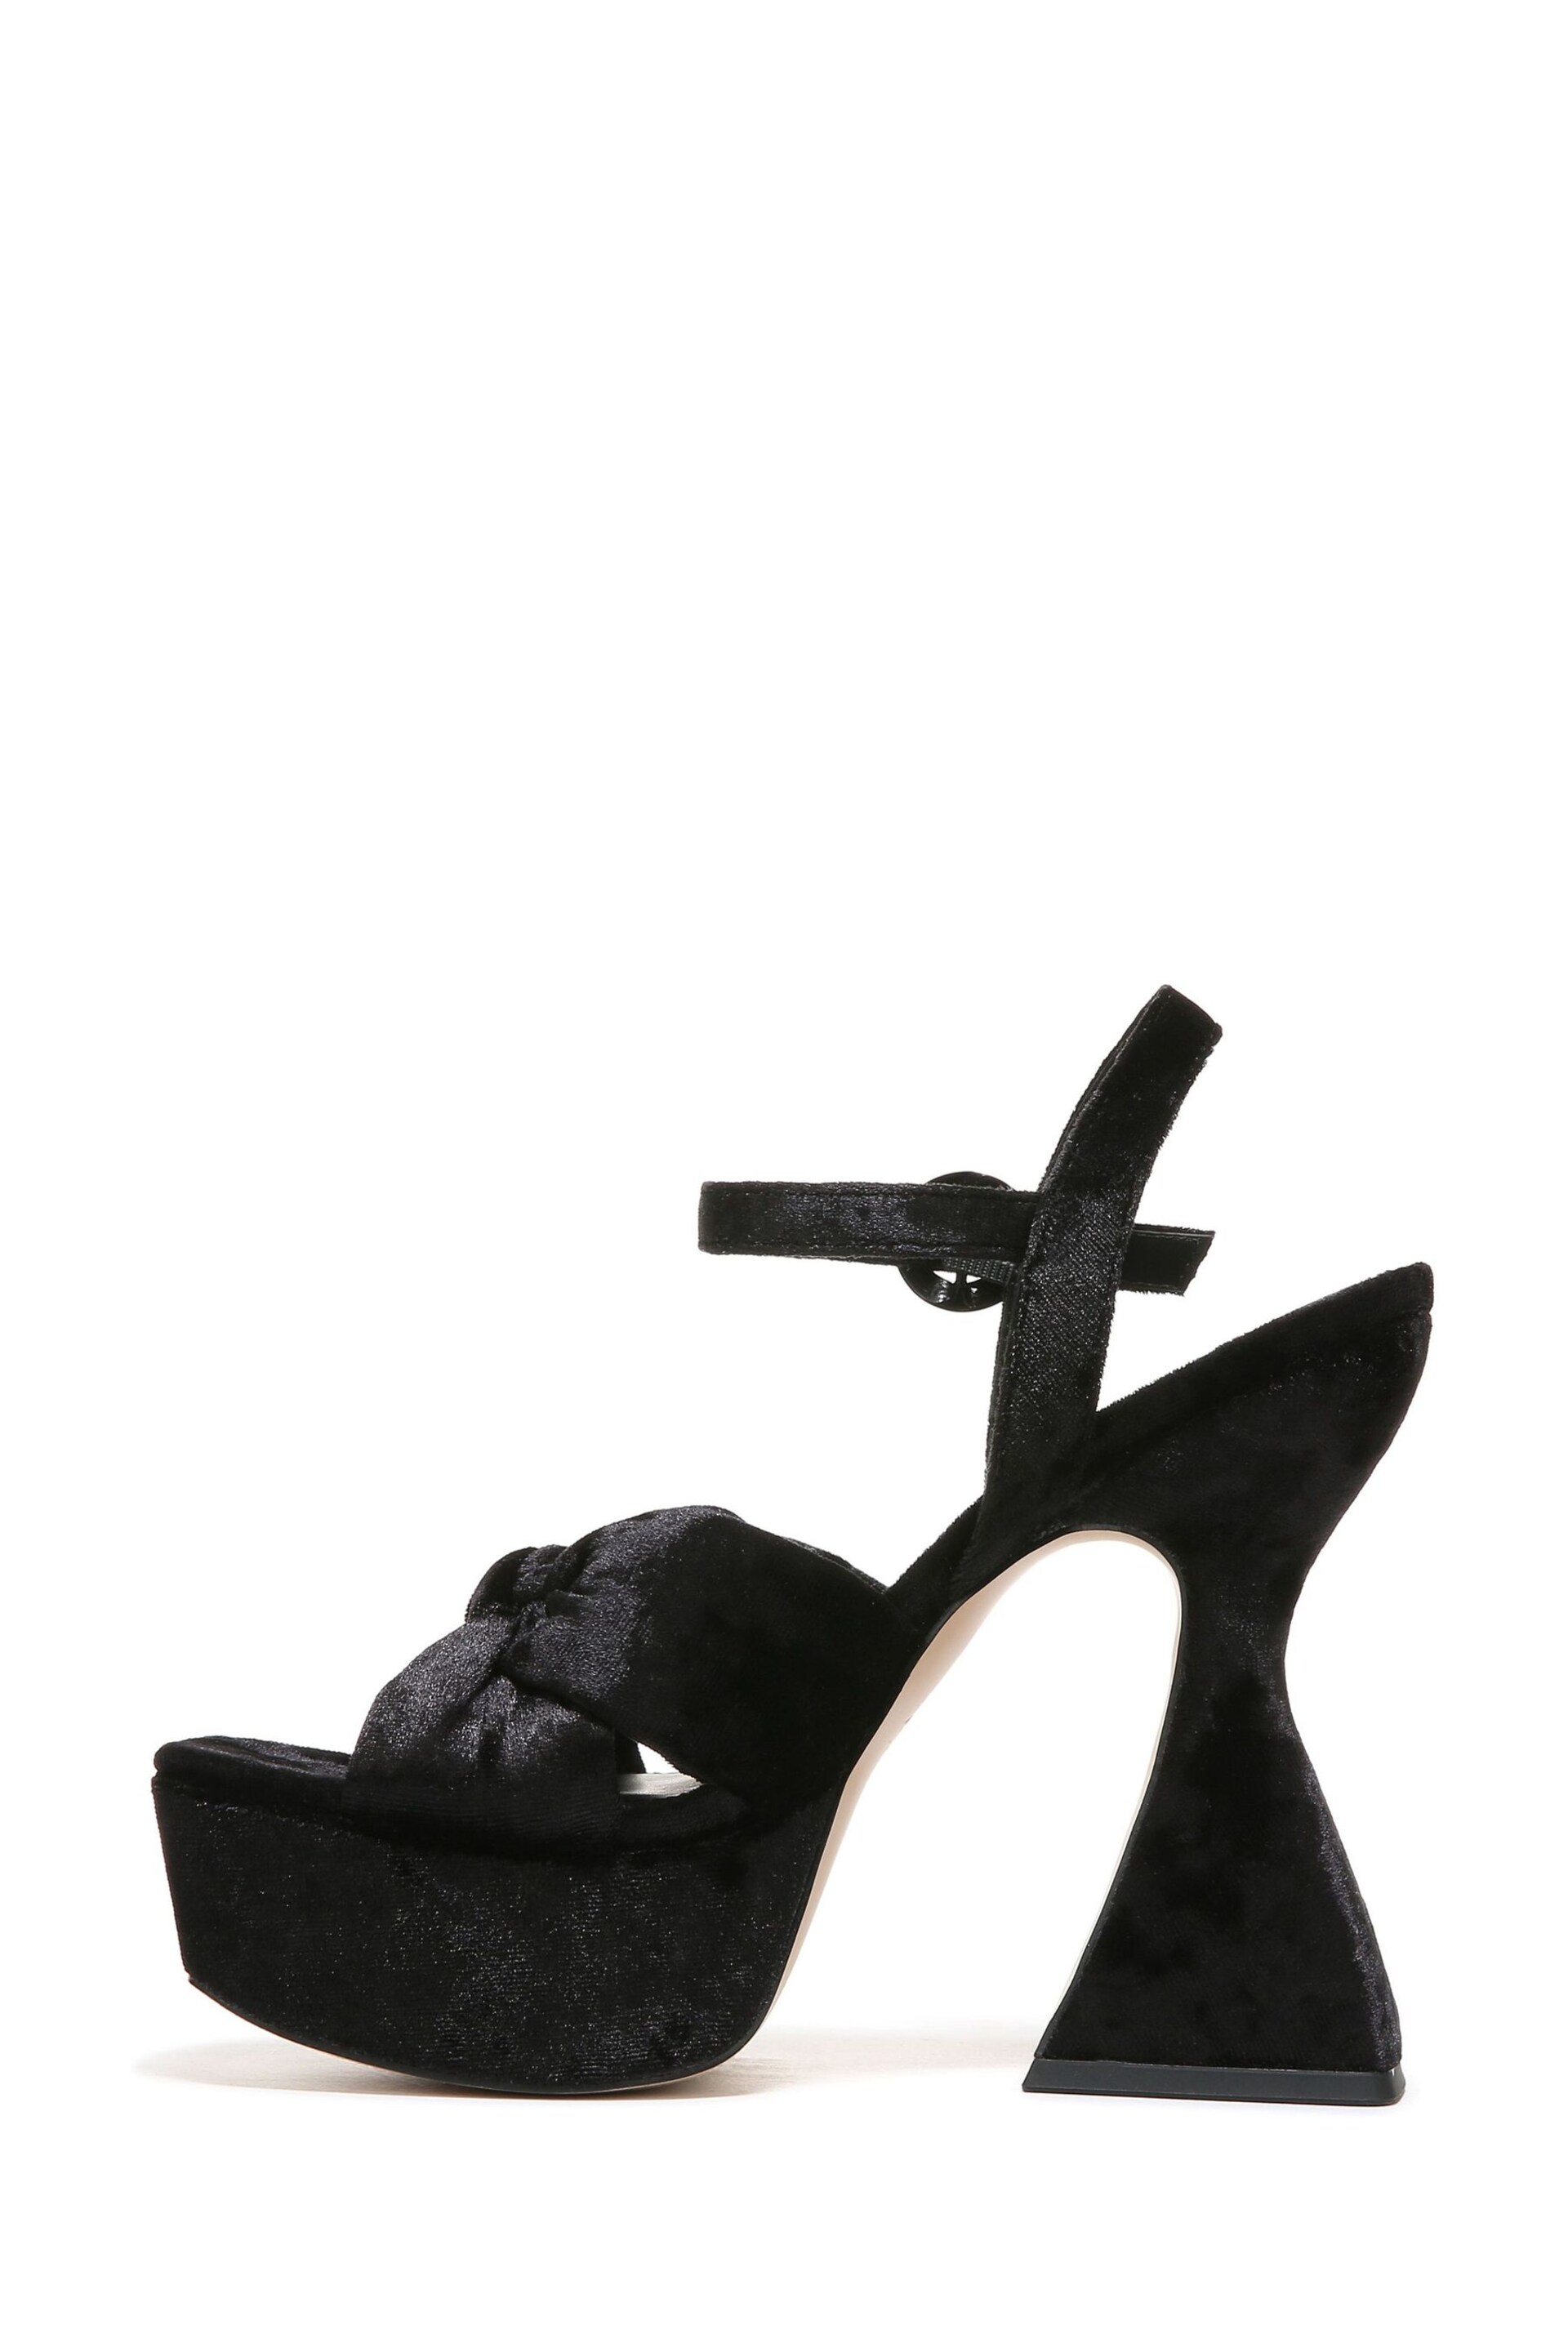 Circus NY Audrea Strappy Black Sandals - Image 2 of 6